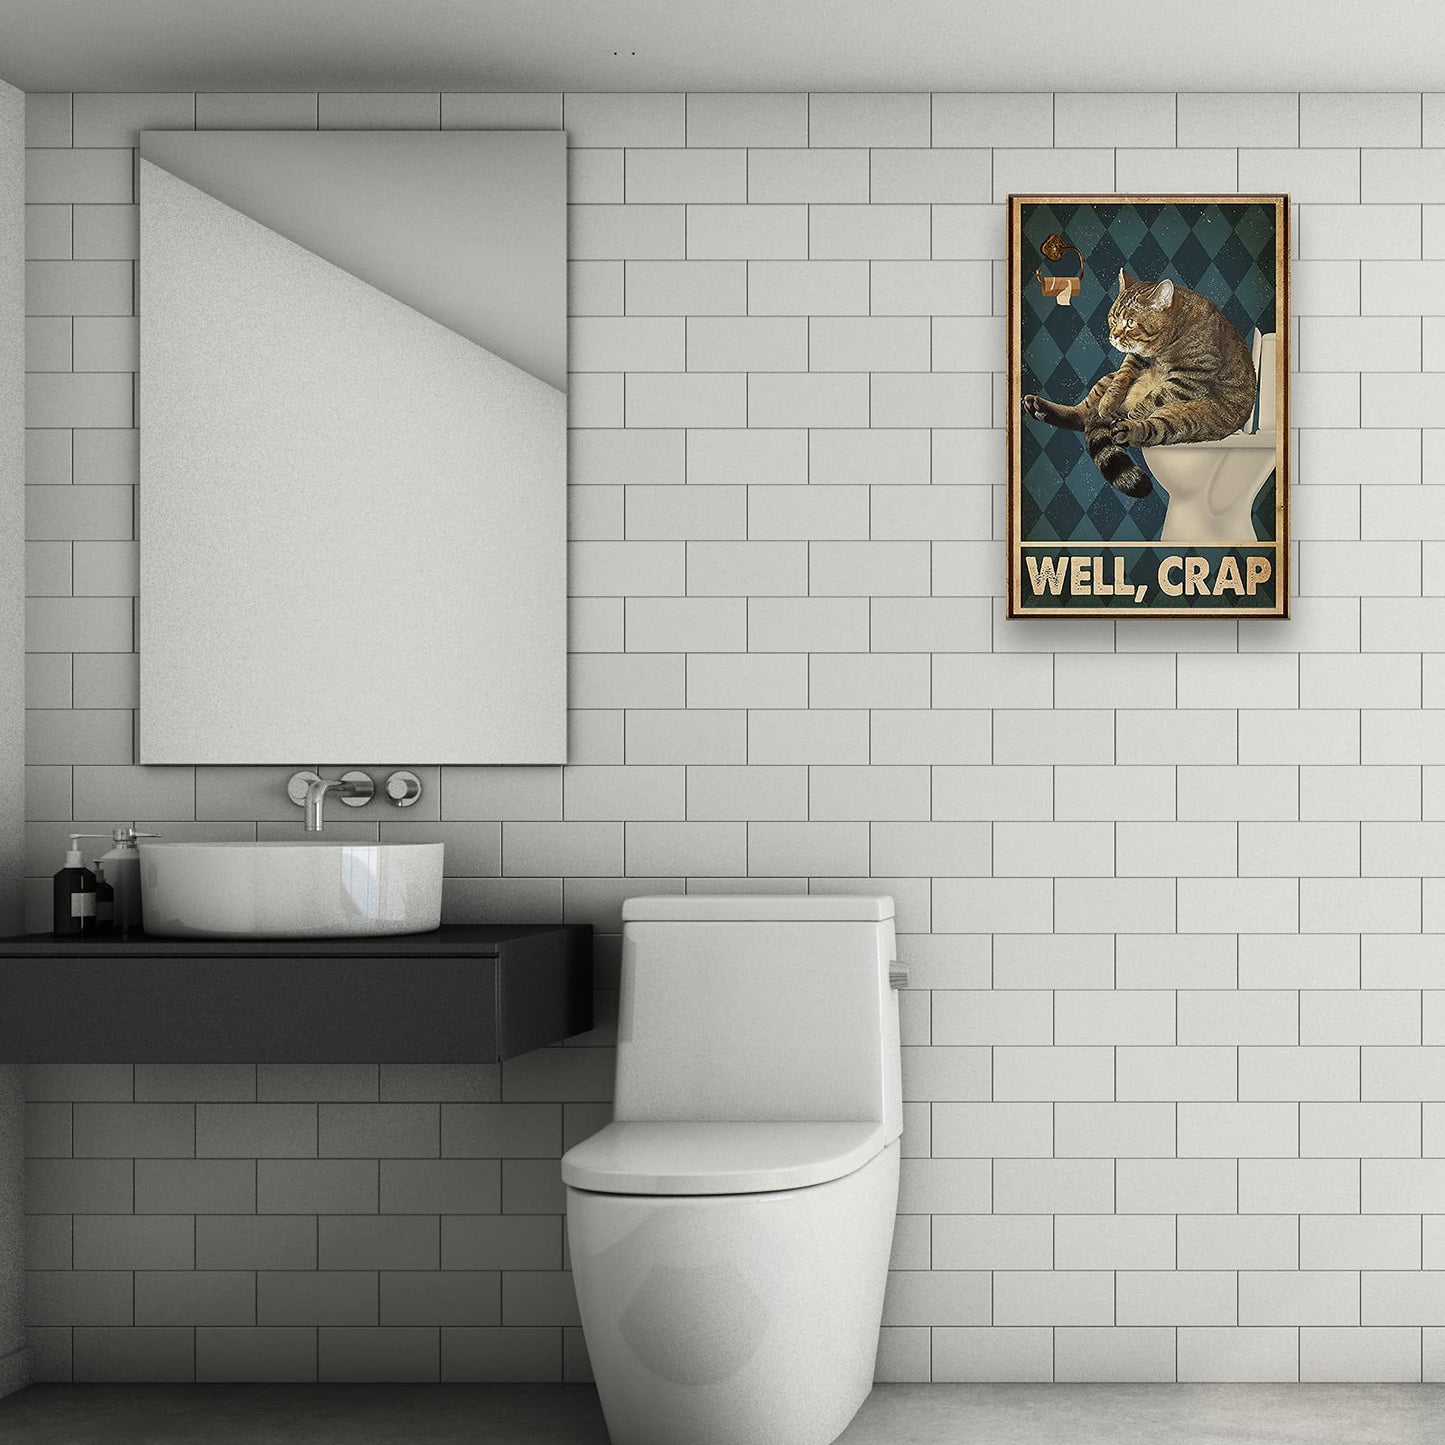 Busmko Cat Paintings Canvas Wall Art Modern Cat Bathroom Decor Posters for Wall Funny Expression Retro Toilet Picture Print Decoration Painting Unframed 08x12 inch(20x30cm)